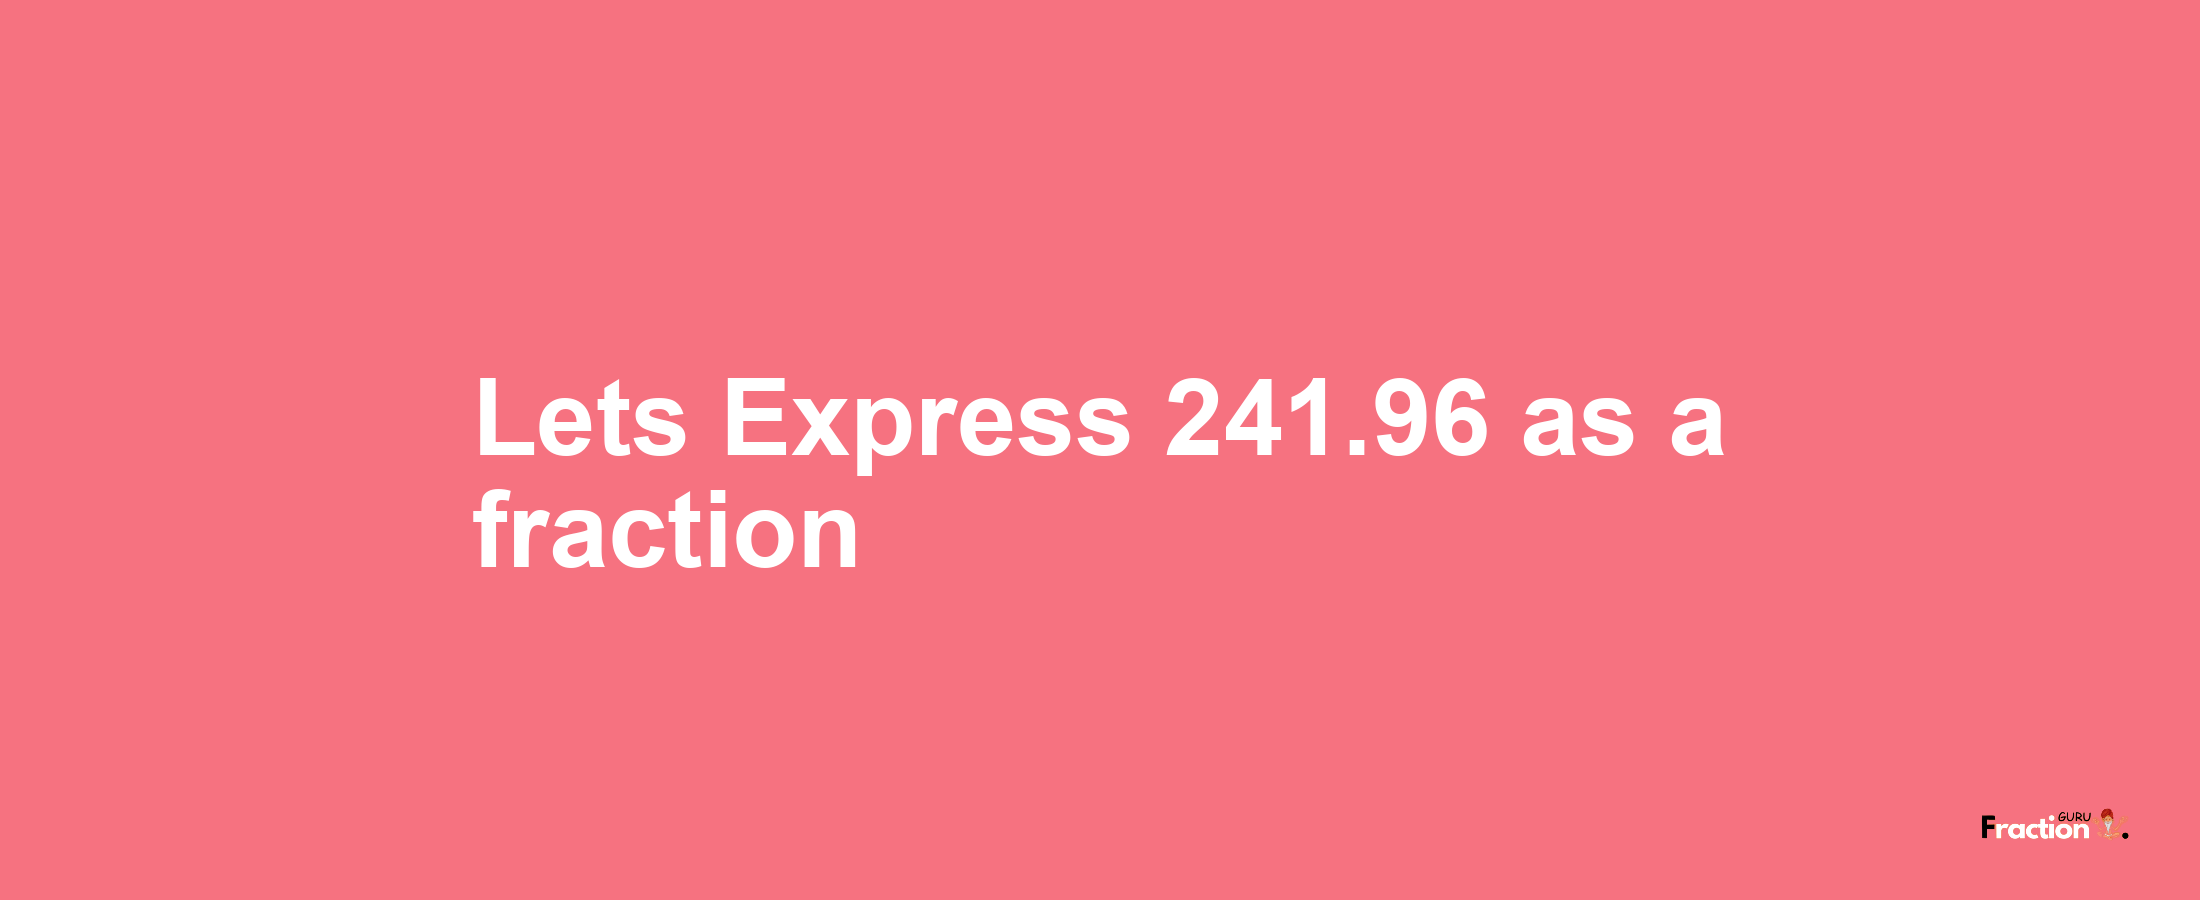 Lets Express 241.96 as afraction